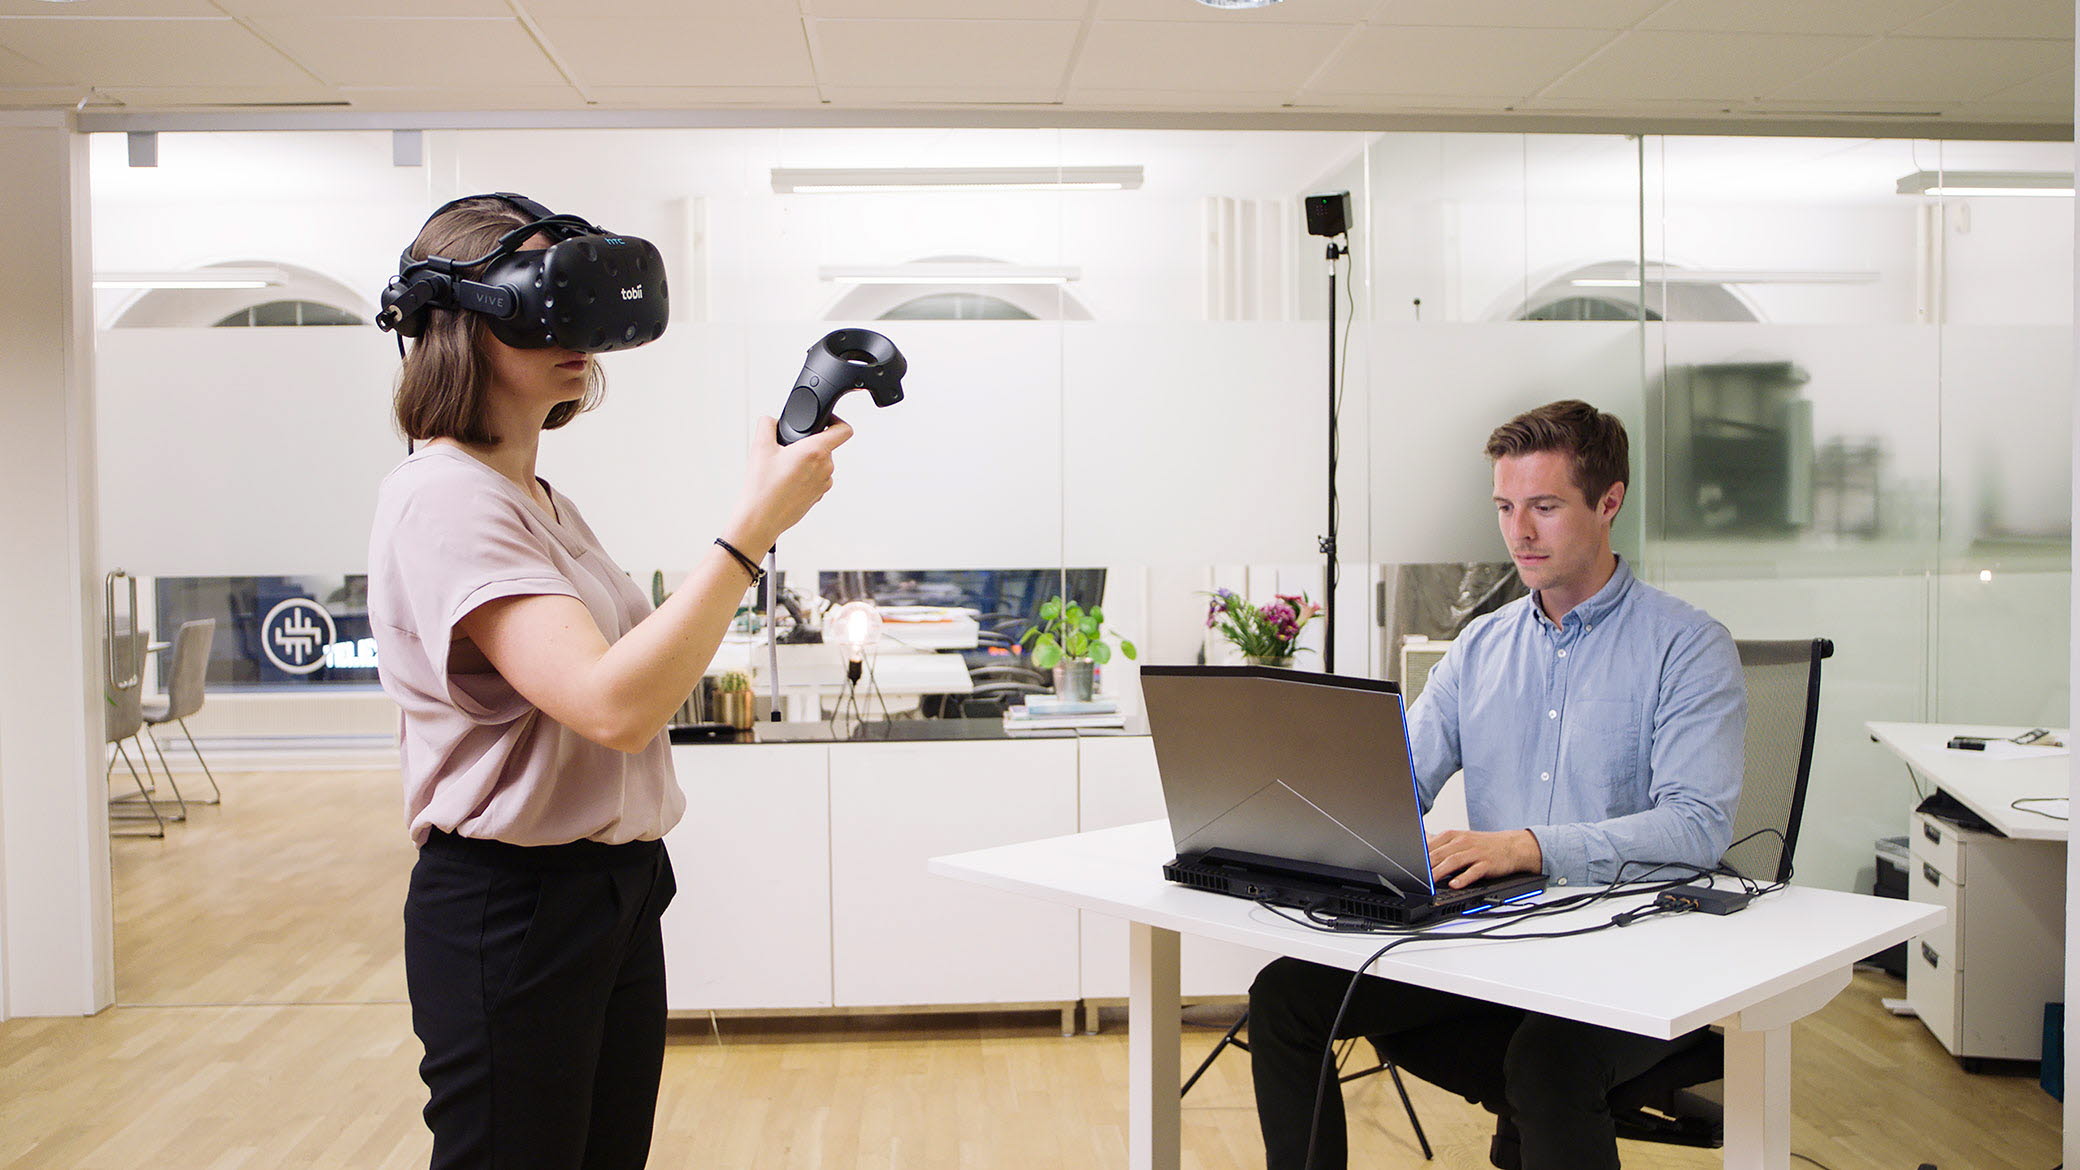 Tobii Pro VR Analytics is used for consumer journey testing with eye tracking in VR environments